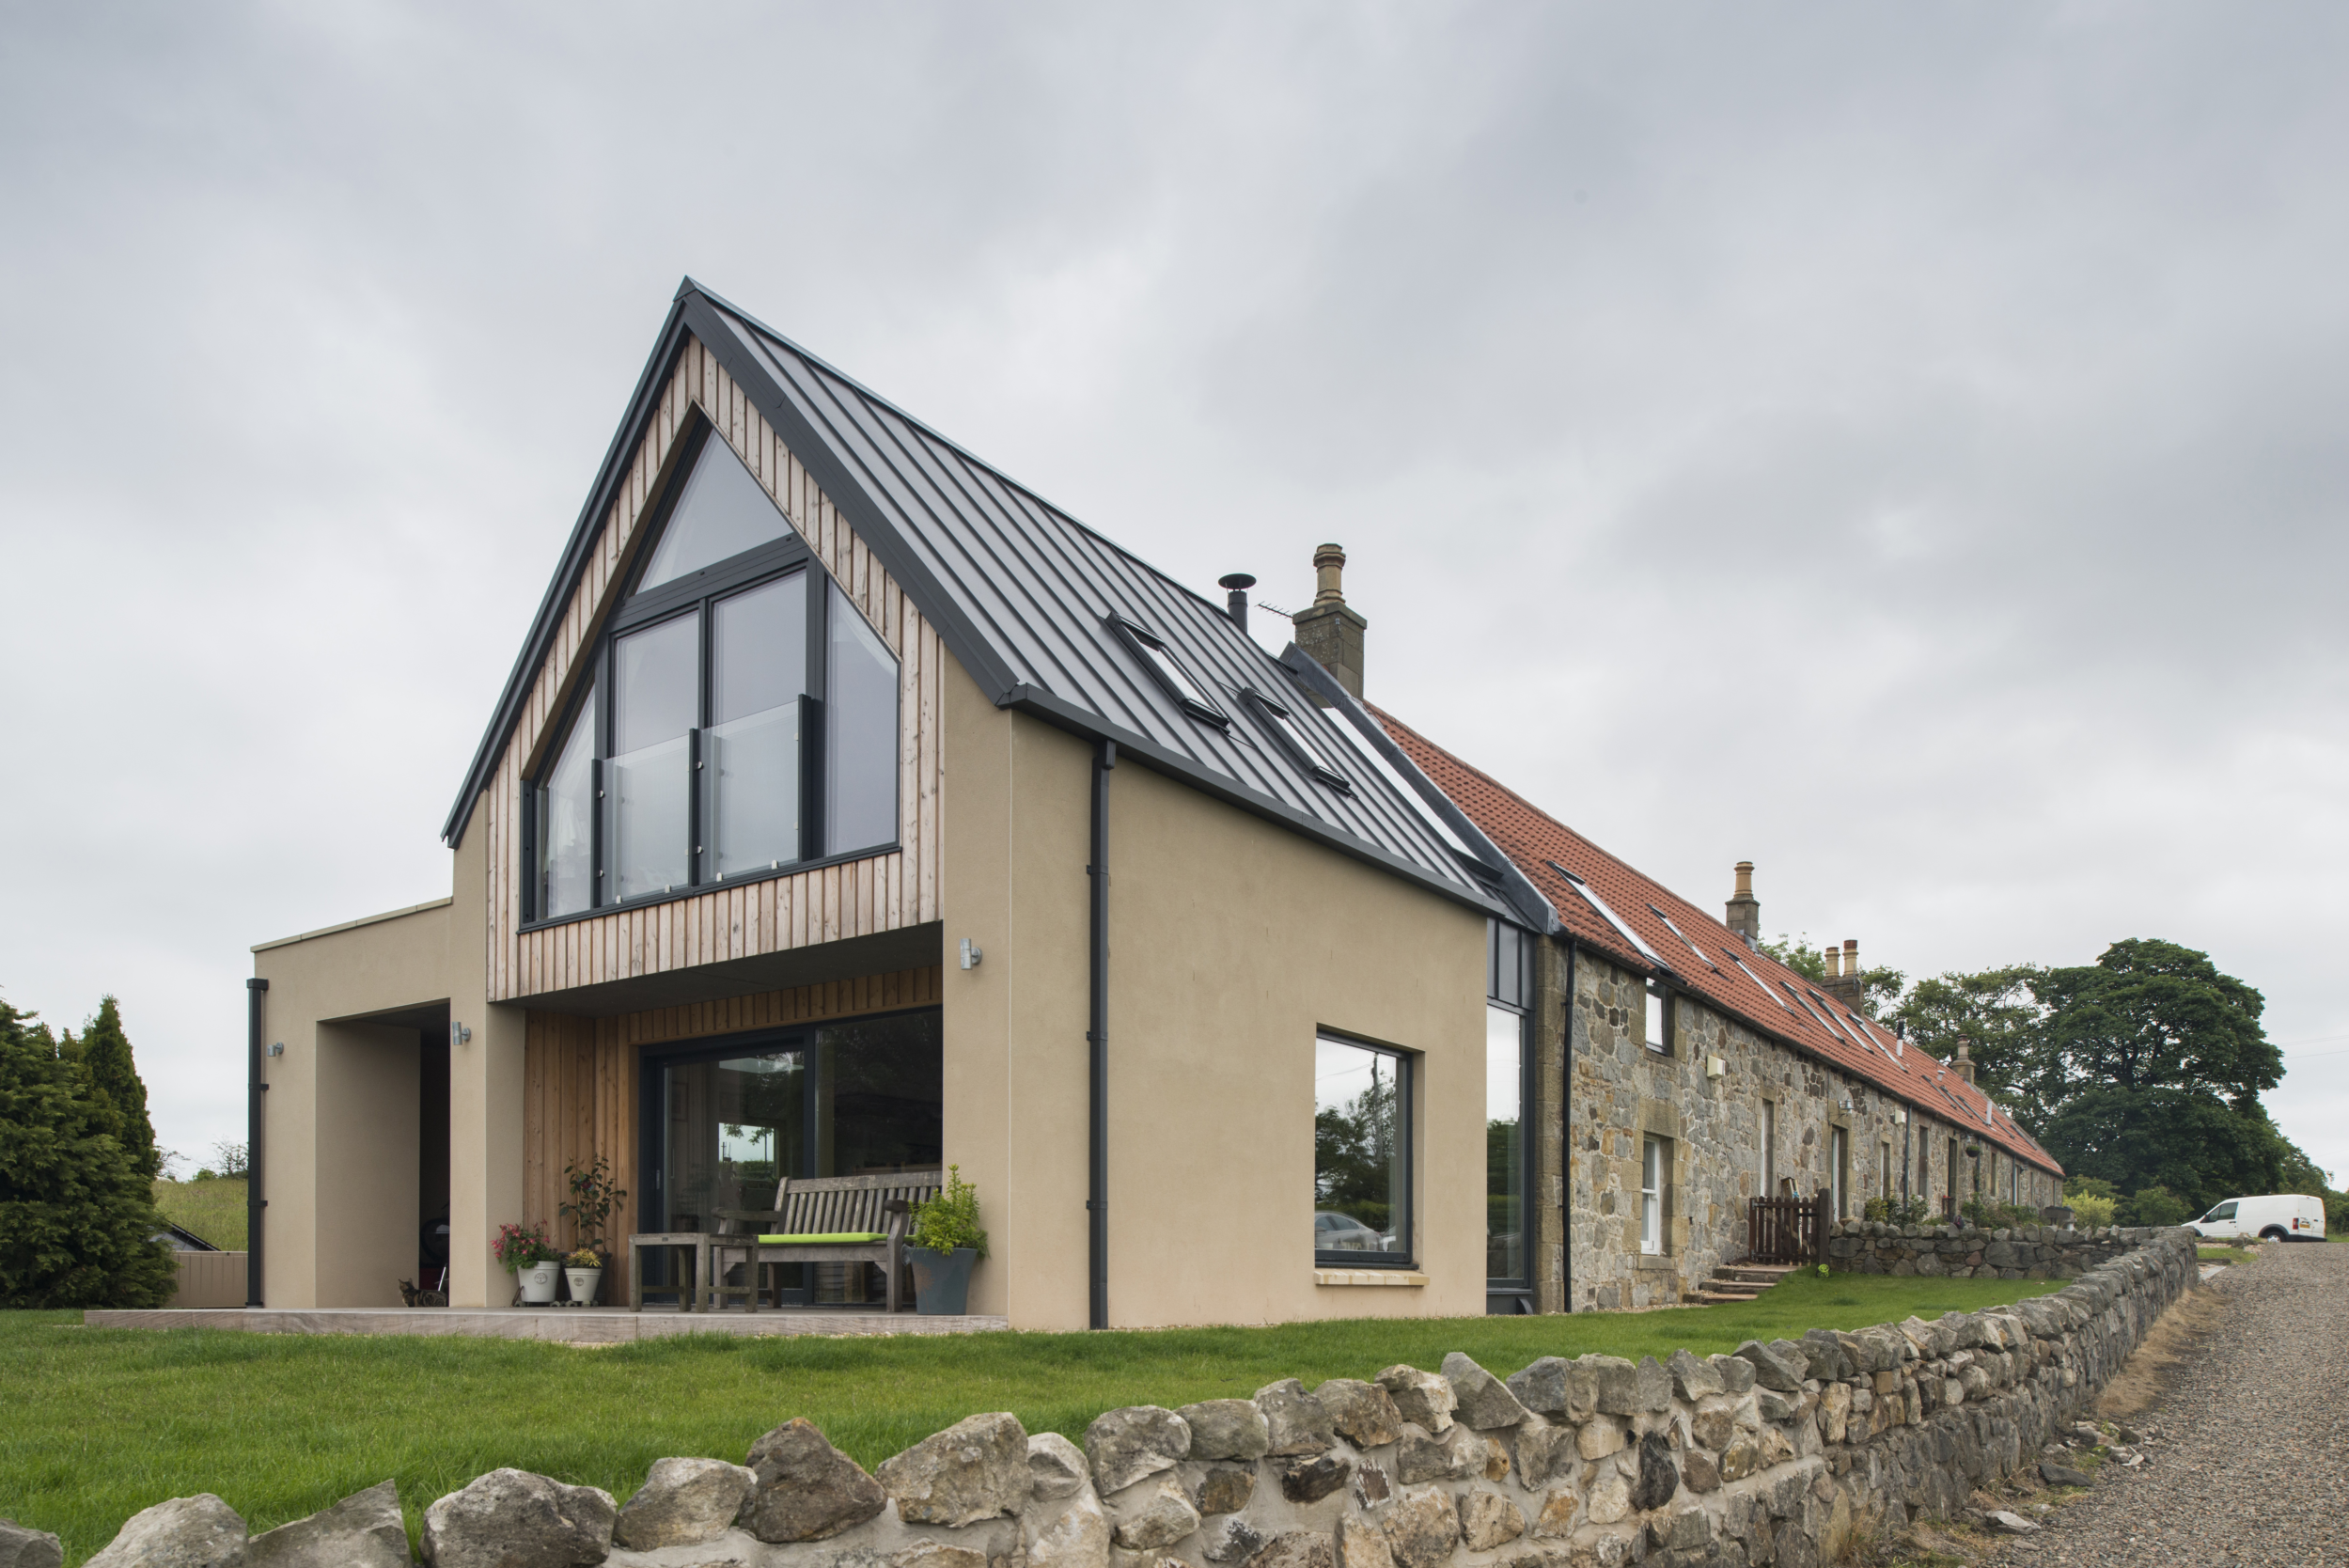 Beautiful home extension using metal standing seam roof from Catnic